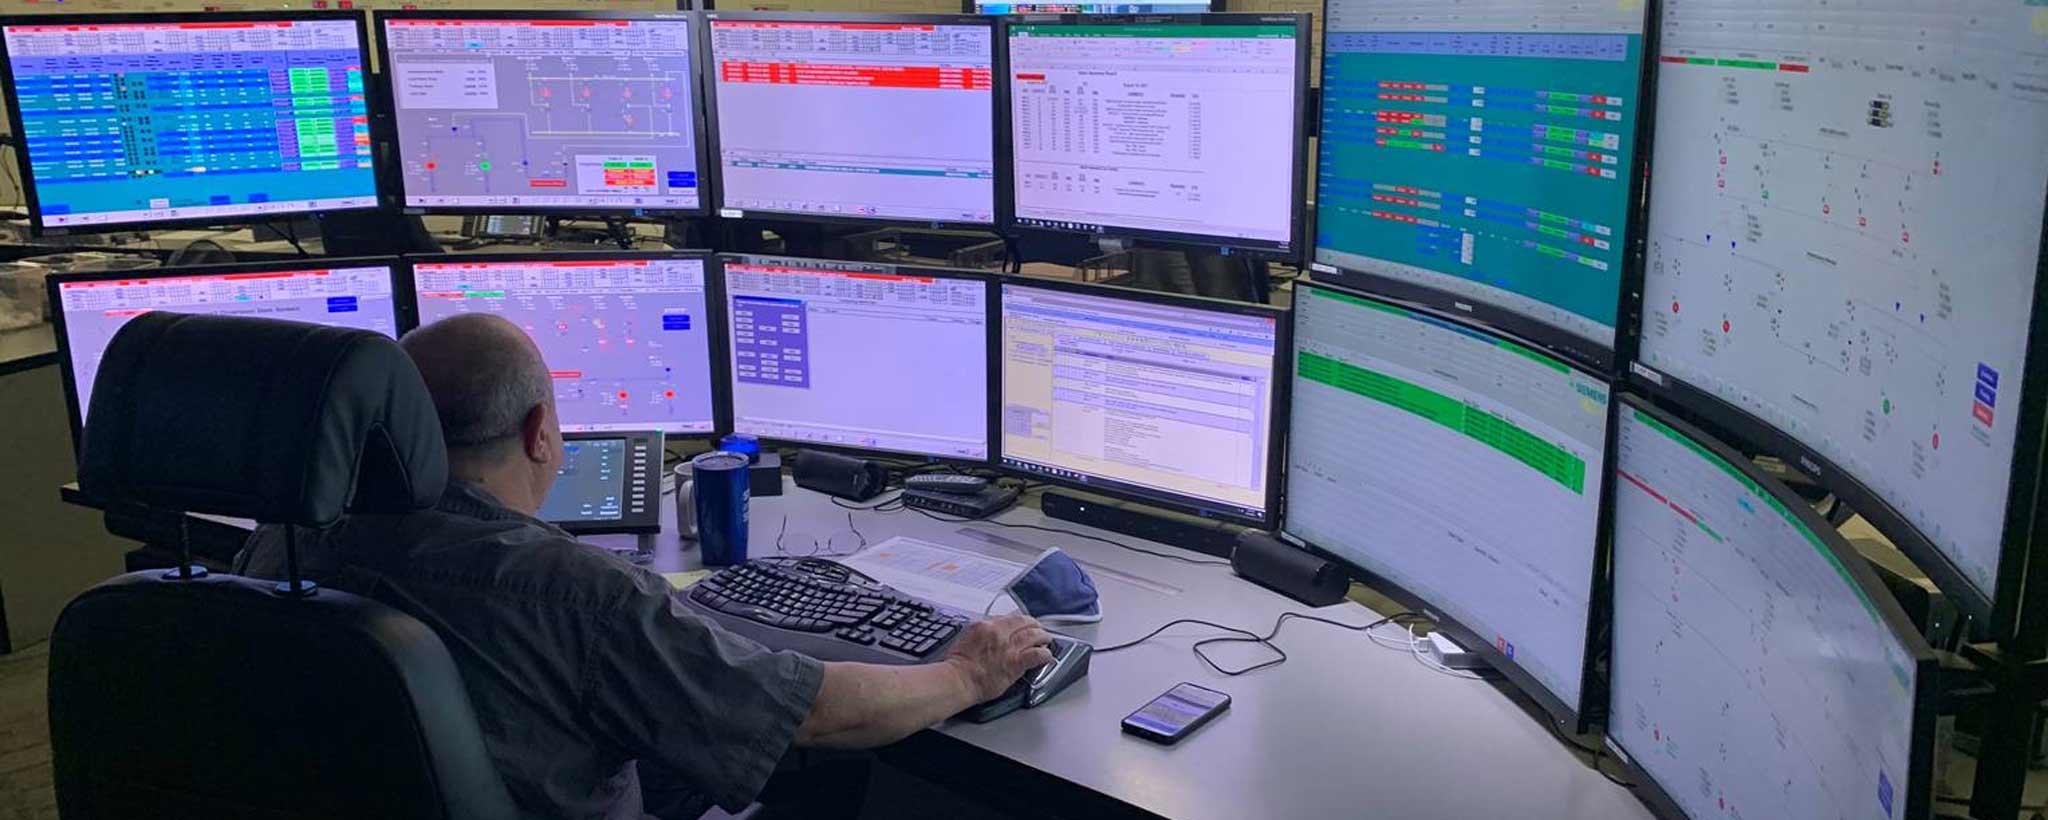 Man working at the Hydro Dispatch Control Center